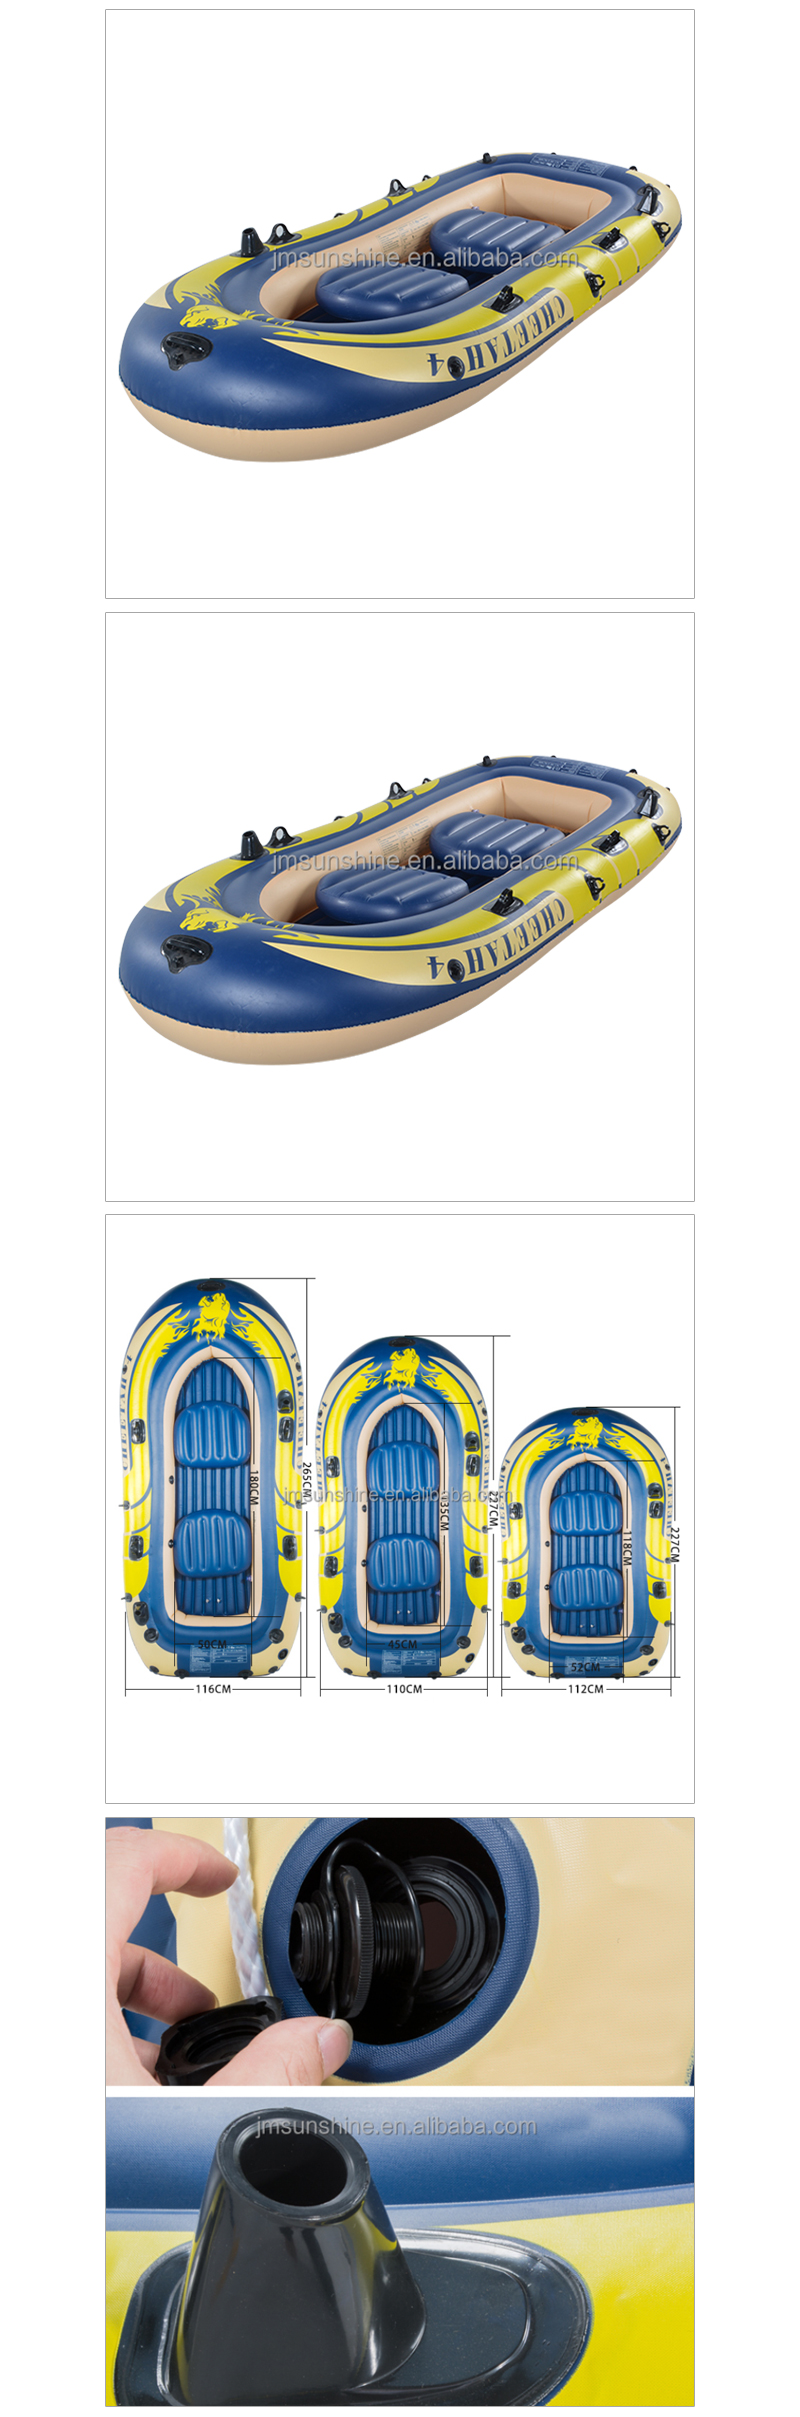 PVC Double Seat Thickened Inflatable Boat Fishing Boat_02